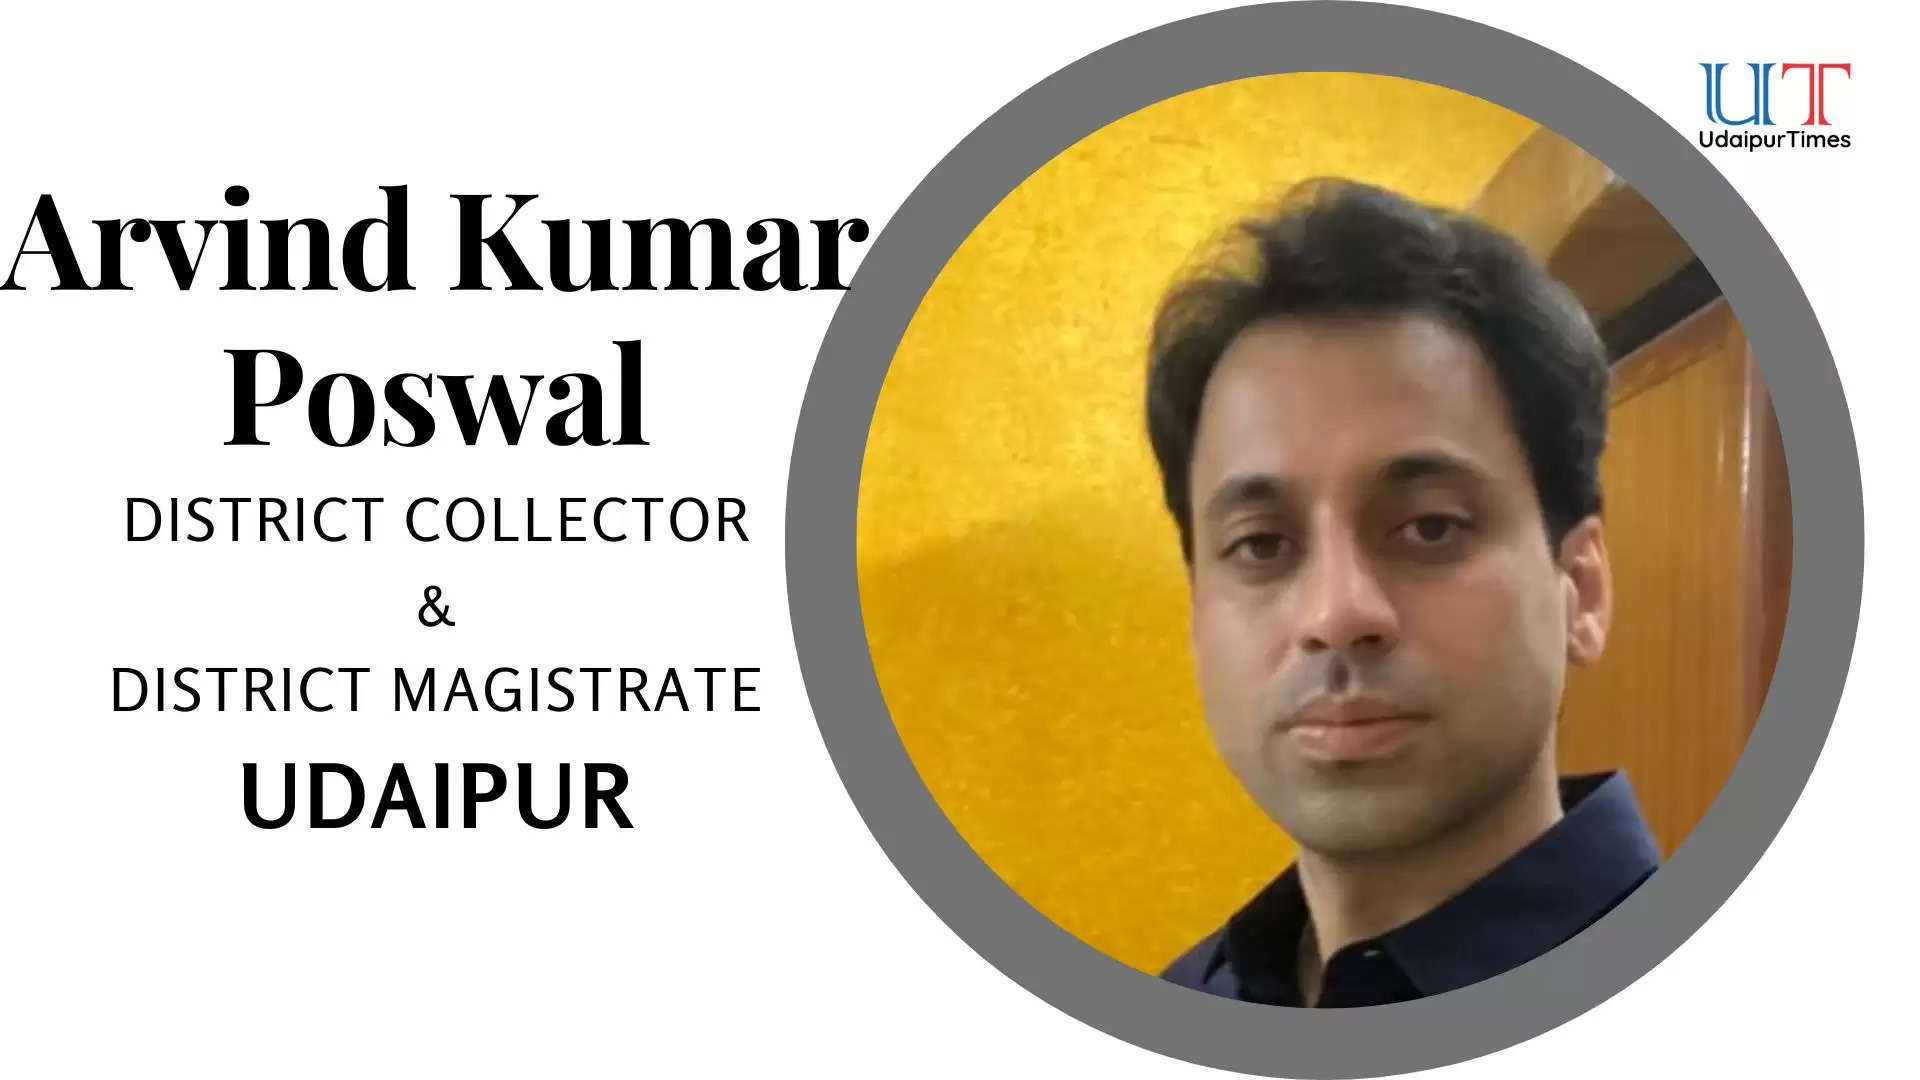 Who is the District Collector and District Magistrate of Udaipur Arvind Kumar Poswal